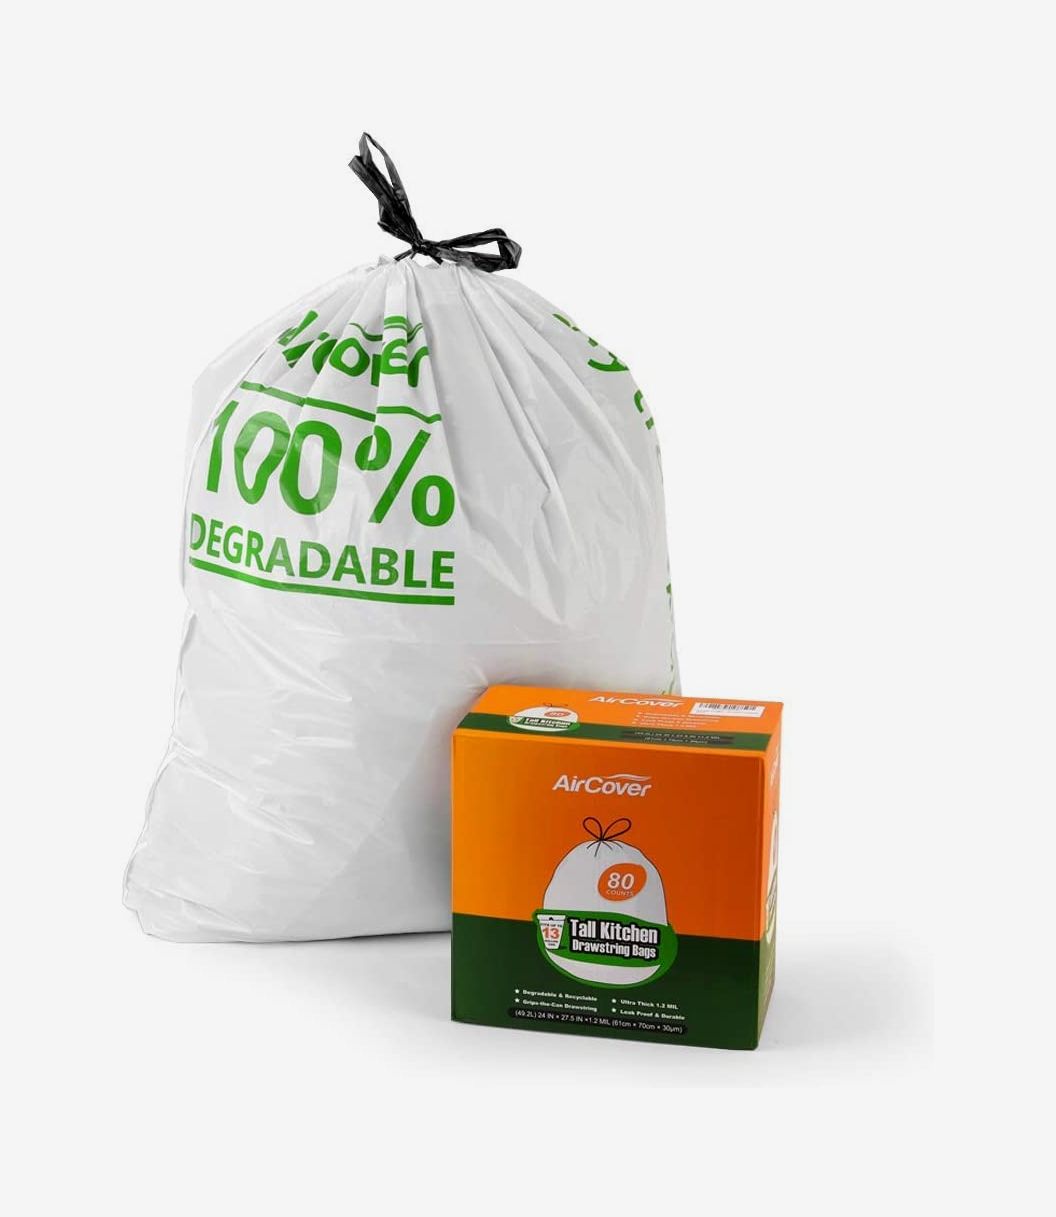 Details about   Biodegradable Garbage Bags 4-6 Gallon Recycling Small Office Kitchen Trash Bags 